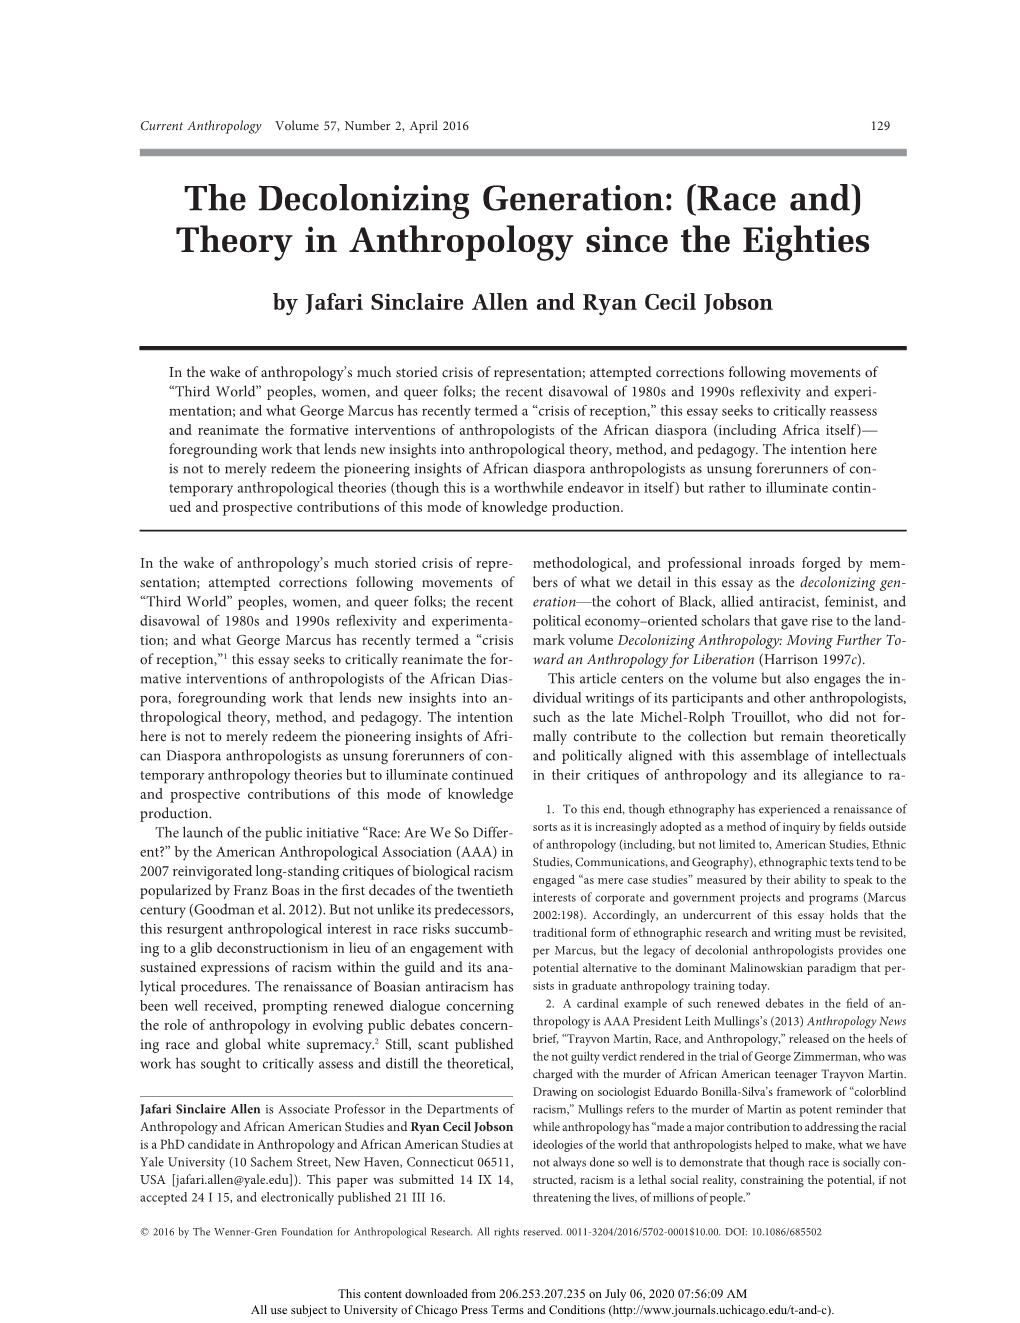 The Decolonizing Generation: (Race And) Theory in Anthropology Since the Eighties